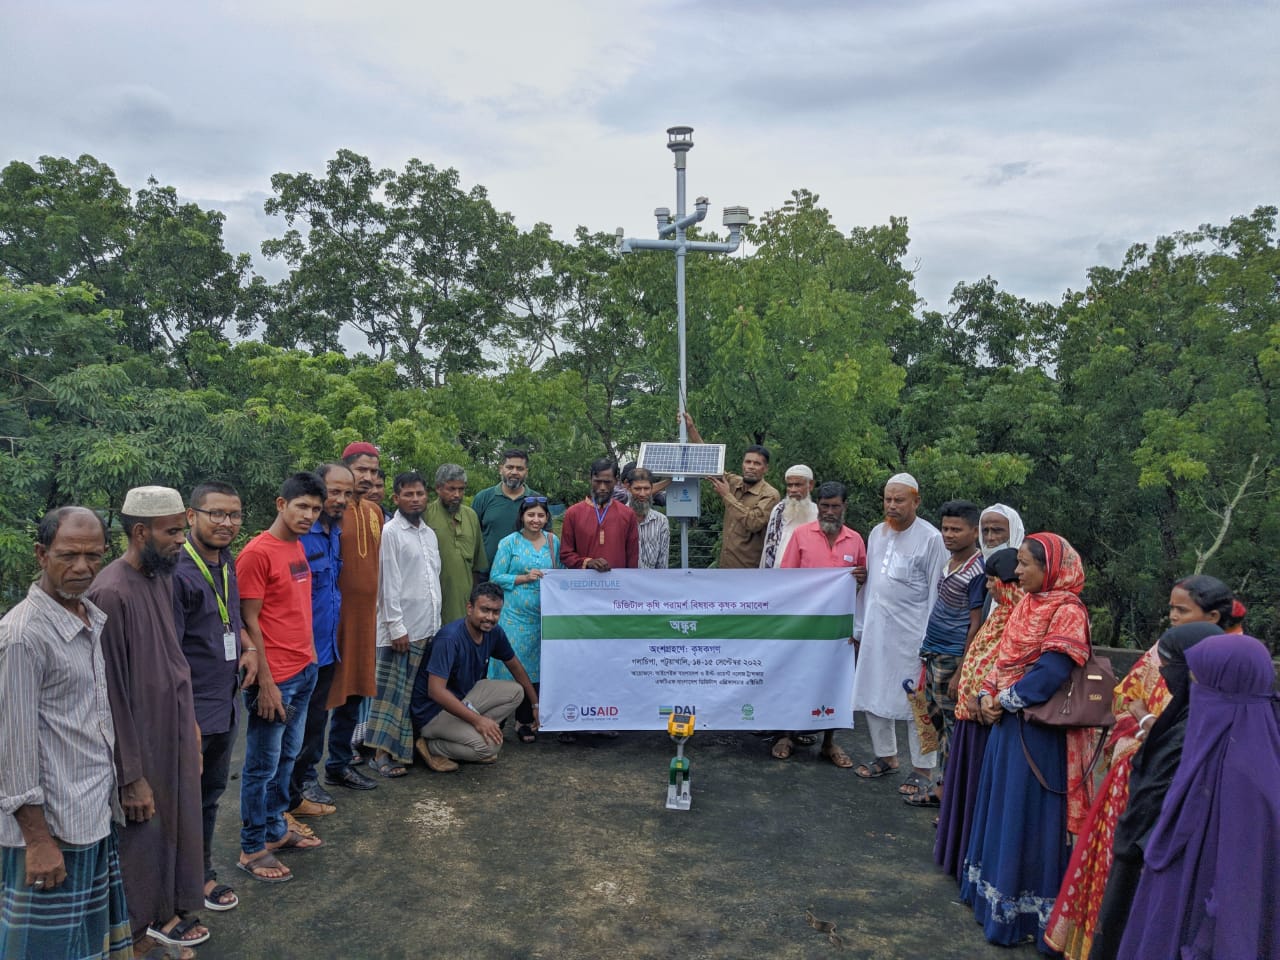 people gather for weather station installation in Bangladesh